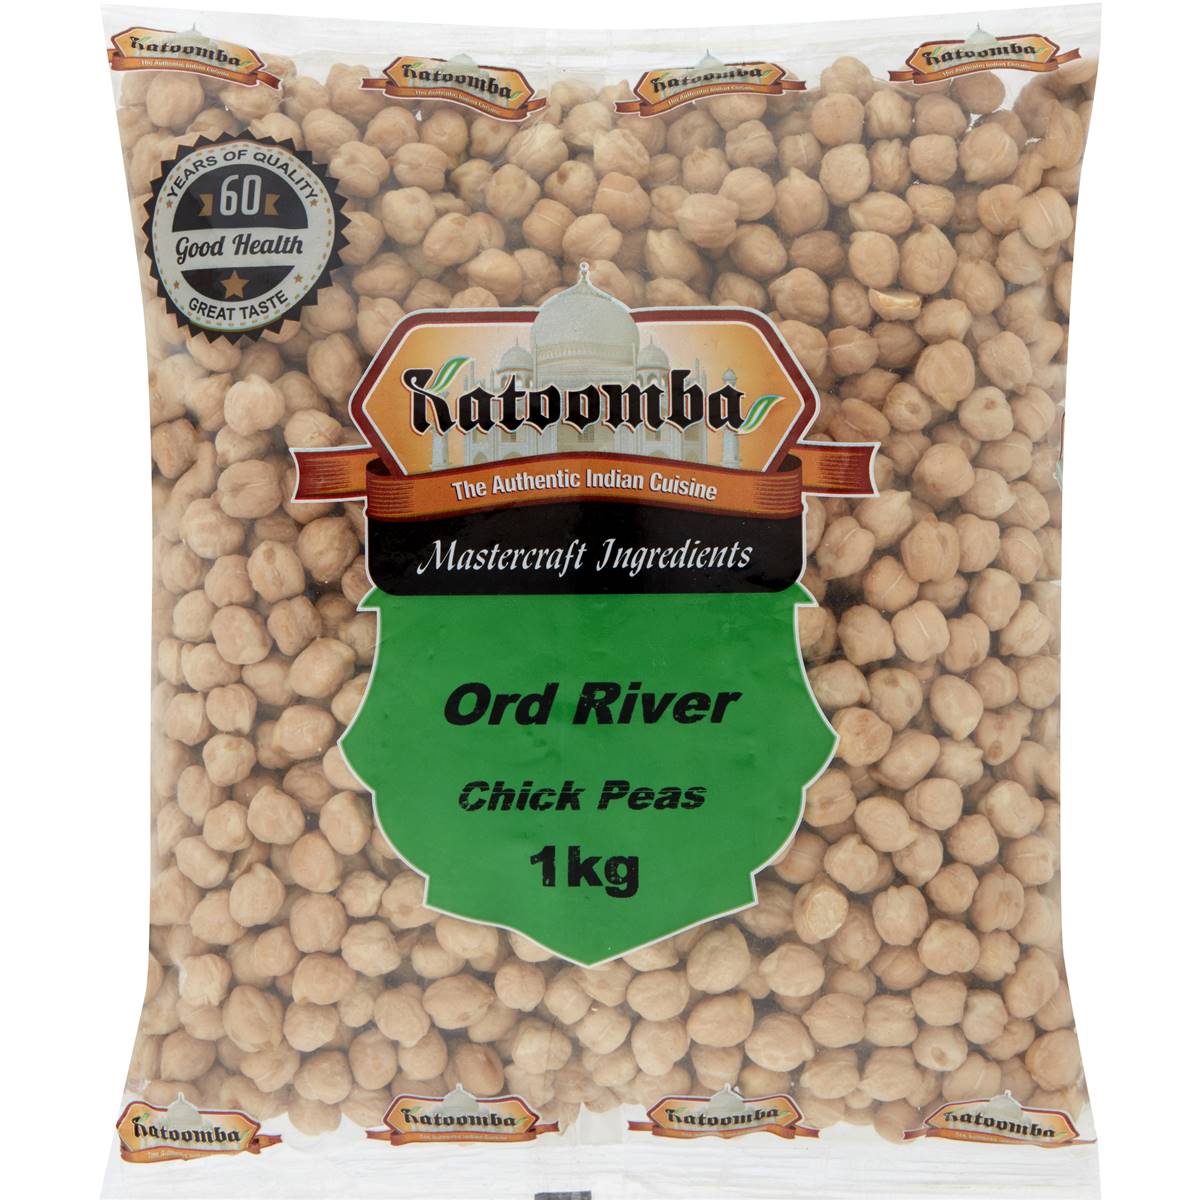 Calories in Katoomba Ord River Chickpeas